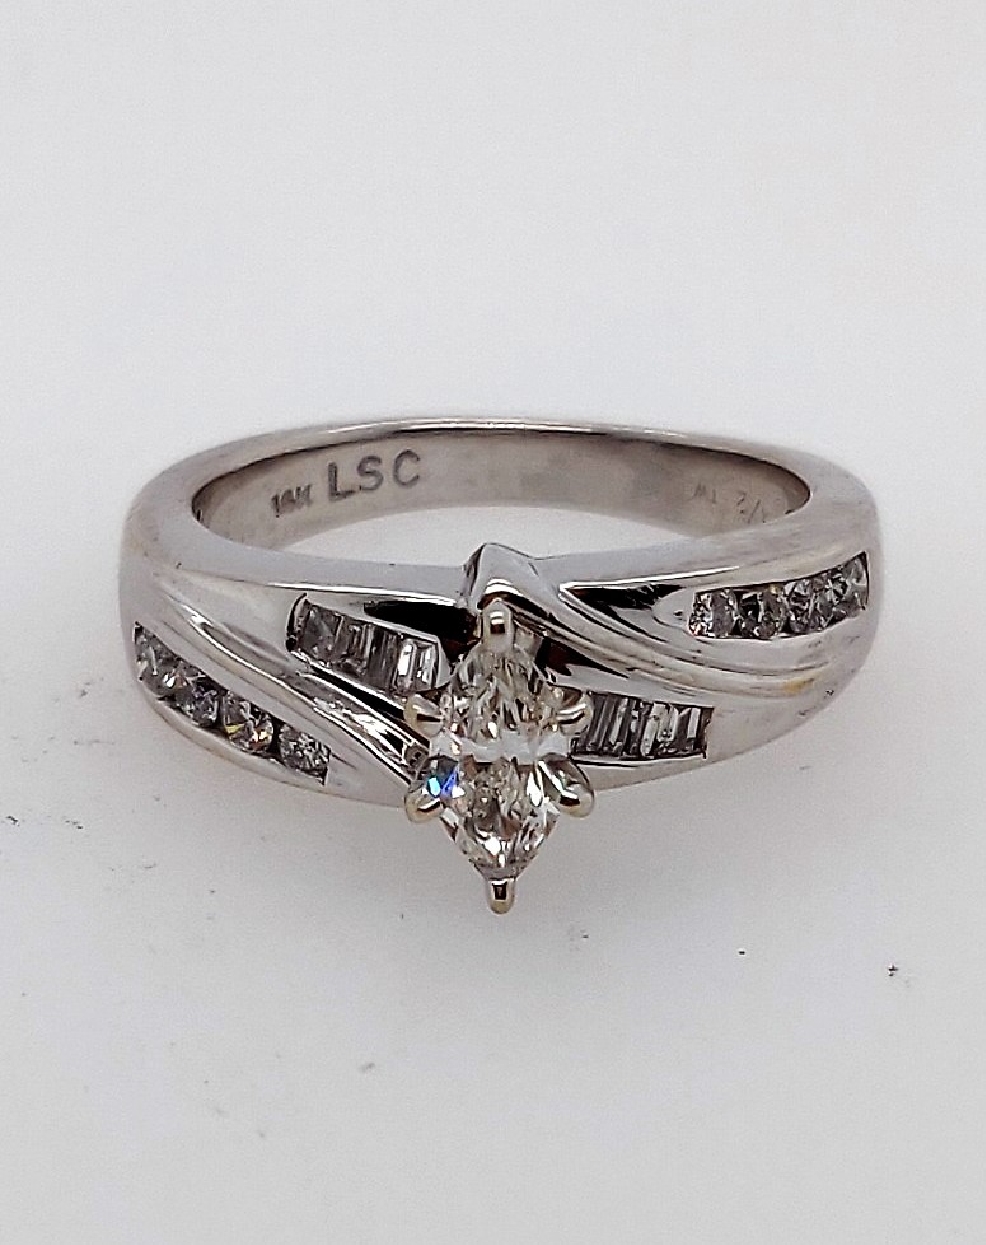 14k white gold engagement ring with prong set 0.32 marquis dia. center I1/J and approx 1/2 carat channel set round and baguette sides SI2-I1/ I-J. Size 5.25.